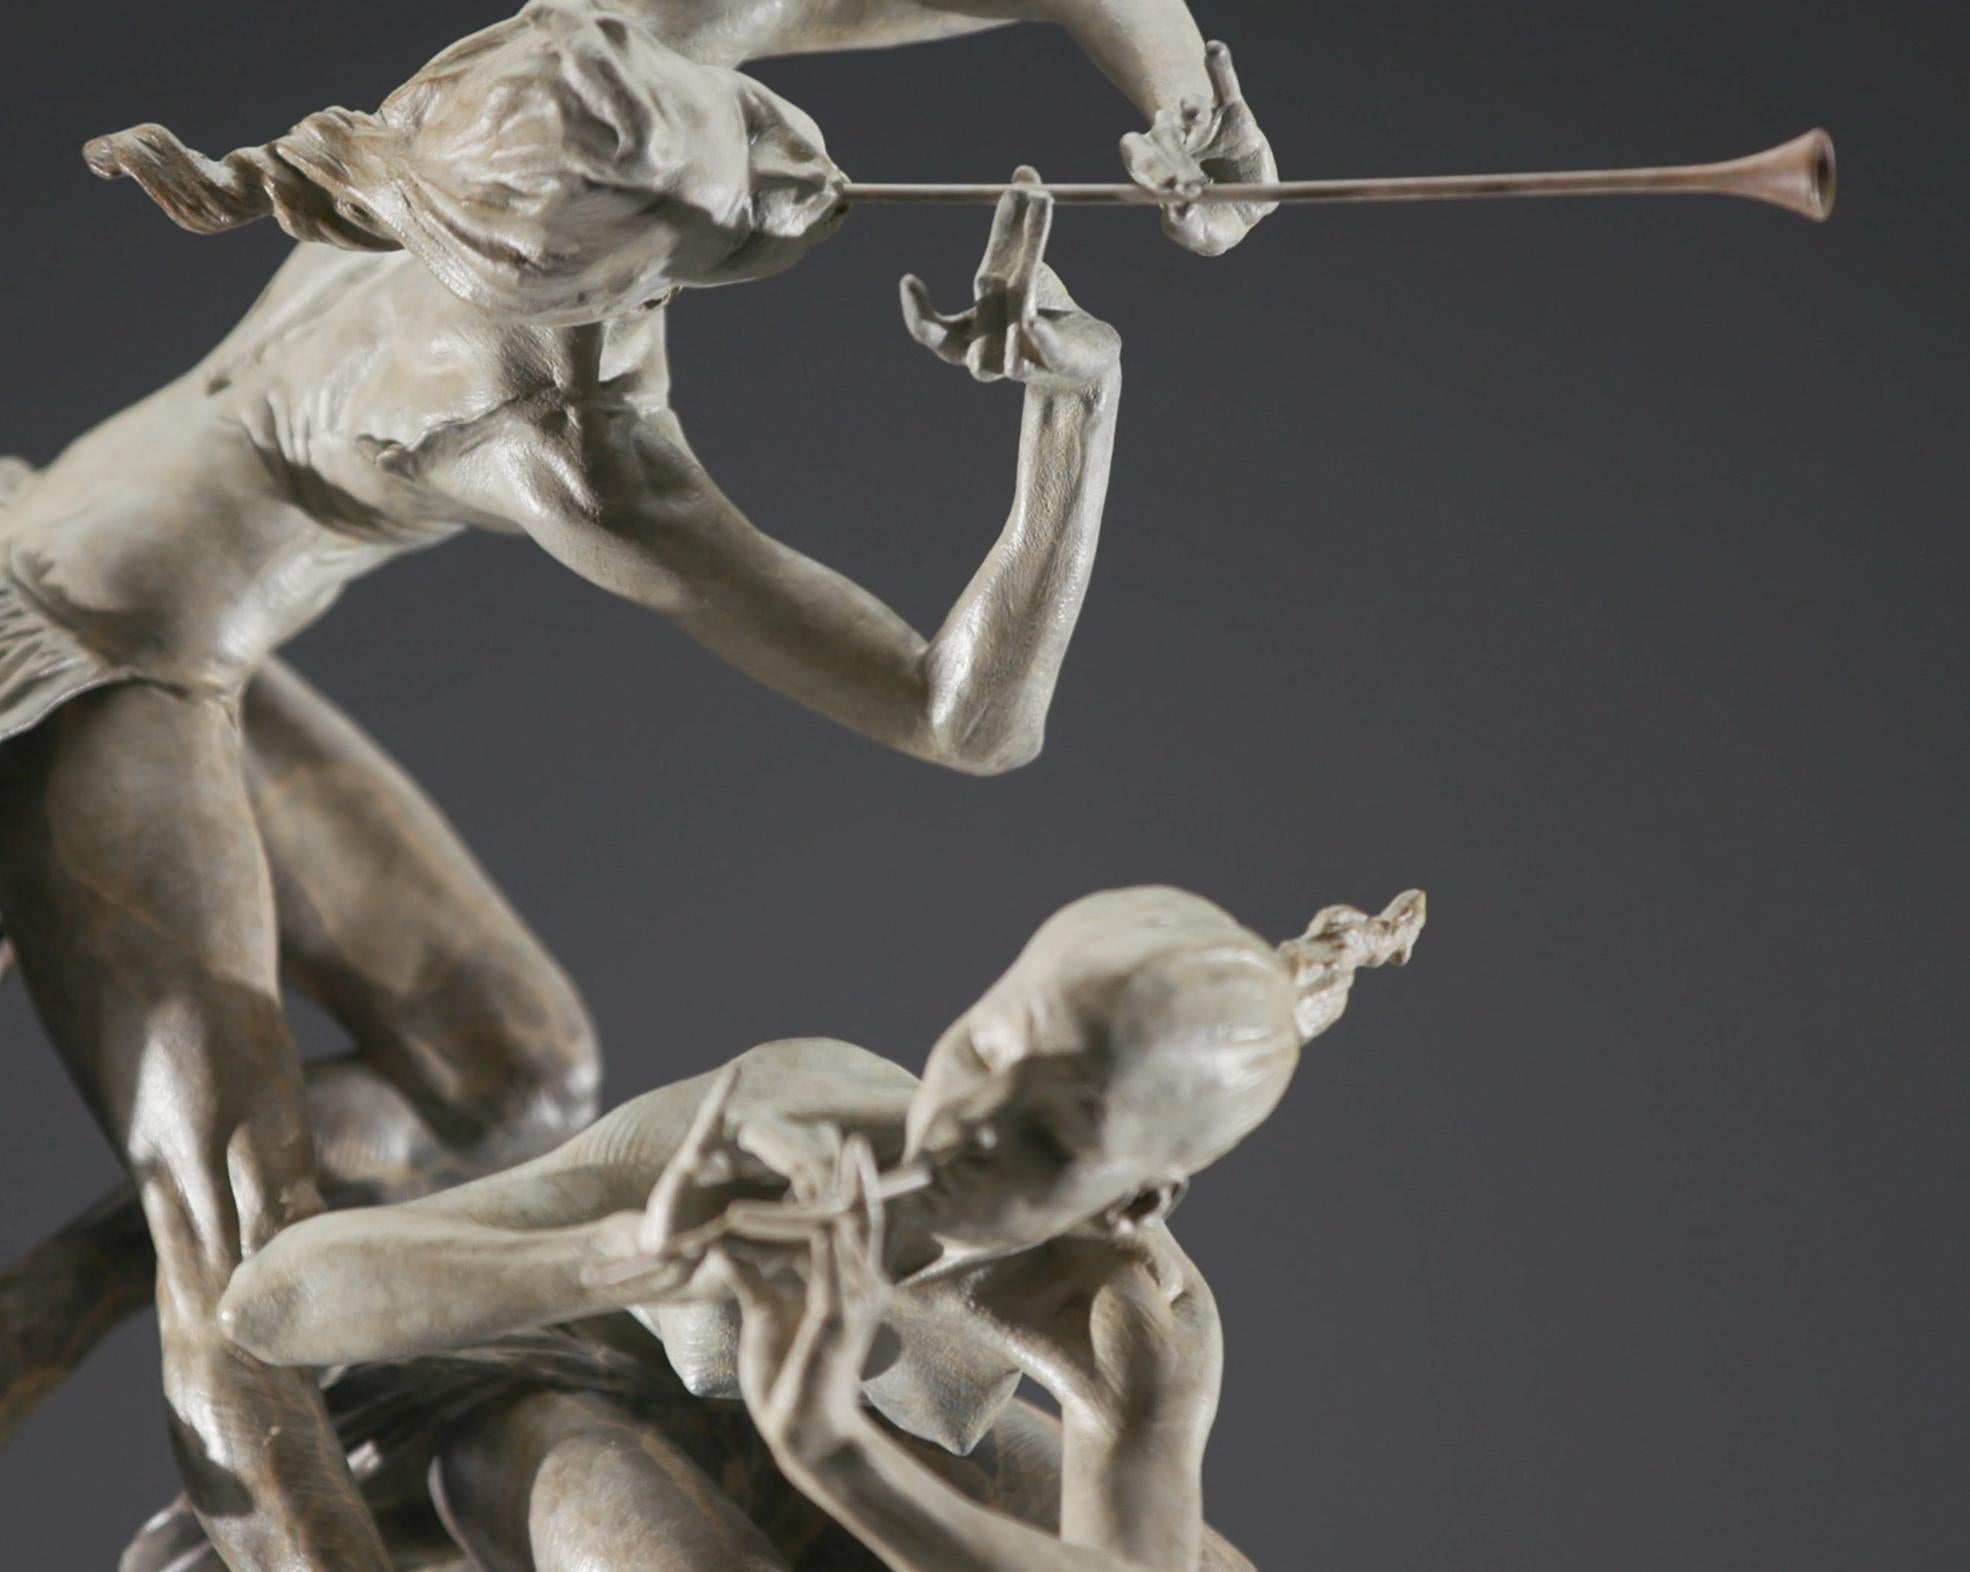 Conceived early in Richard MacDonald’s career, the ideas involving three carefree figures of seemingly enchanted origin continue to stir the artist’s imagination. “Joie de Femme”, expressed as two female figures playing a trumpet and a horn as they